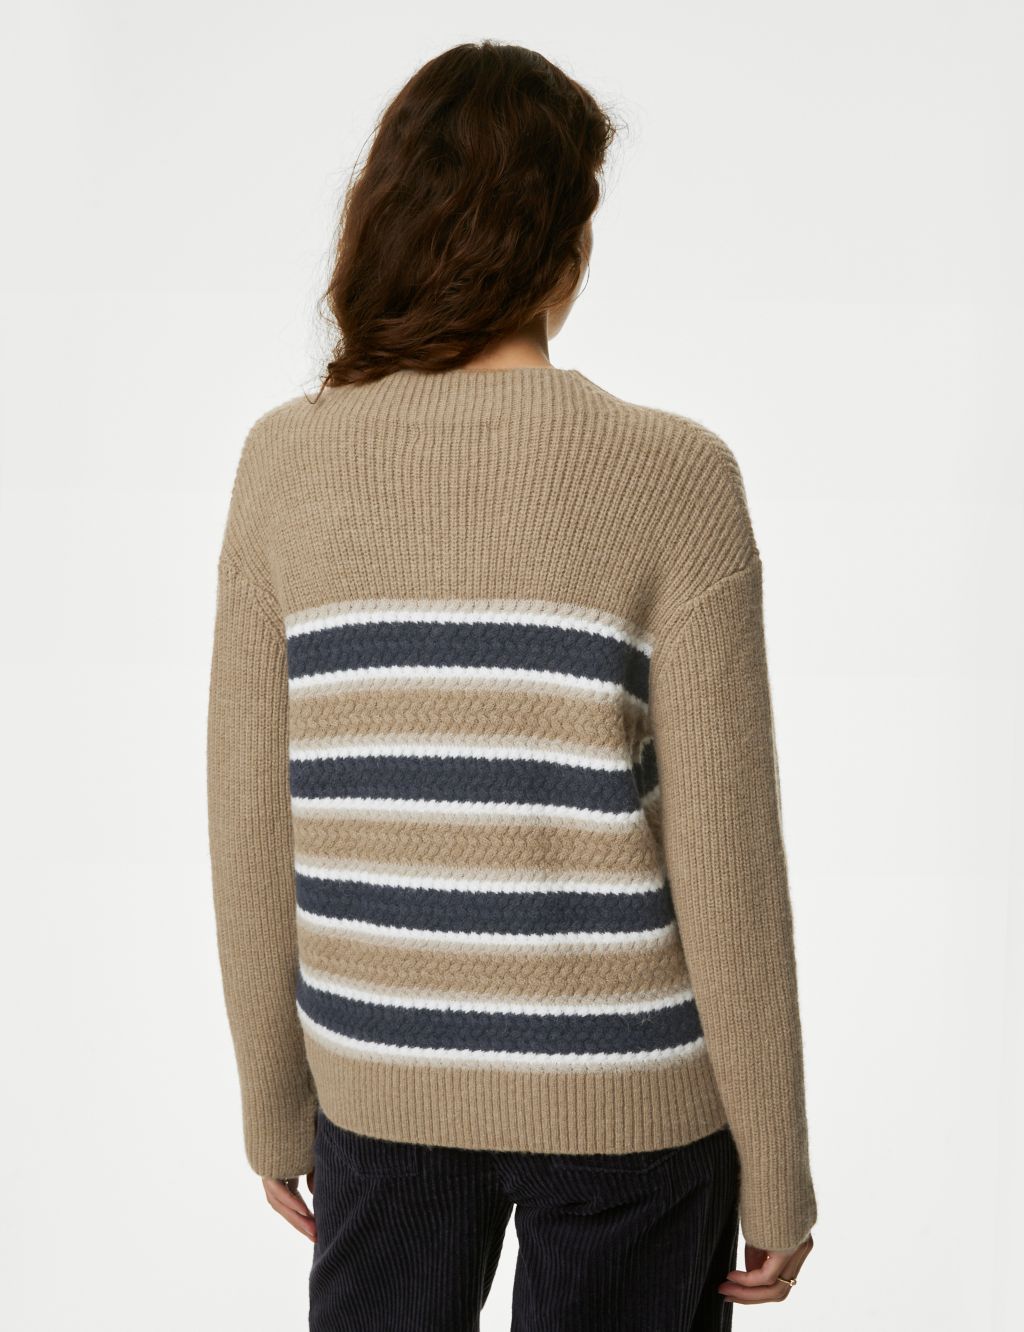 Striped Funnel Neck Jumper with Wool image 5